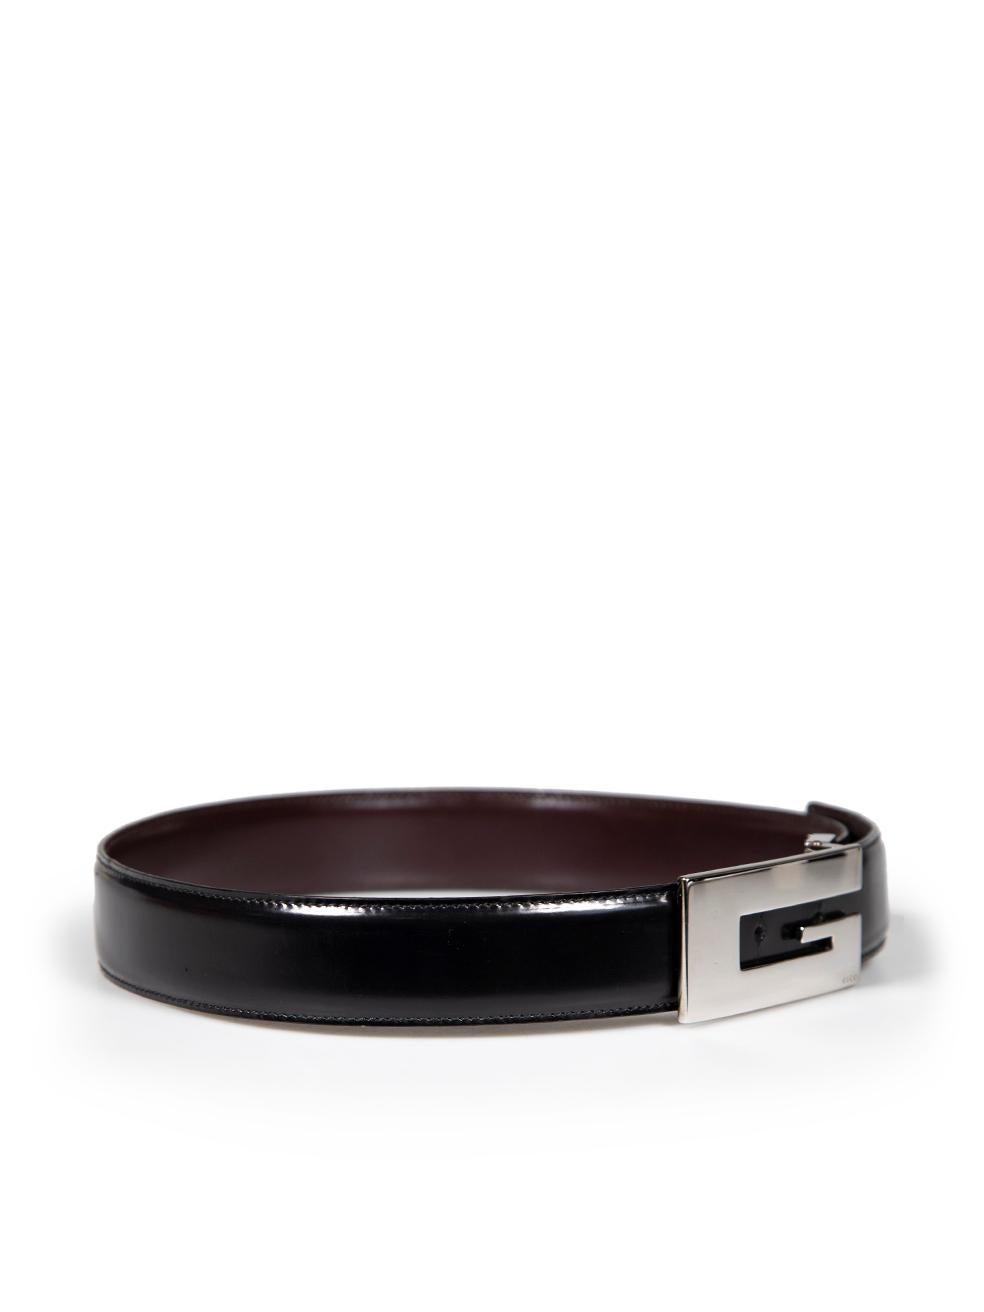 CONDITION is Very good. Minimal wear to belt is evident. Minimal wear to leather where there are small scratches to the external patent leather and some small scratches to the logo hardware on this used Gucci designer resale item.
 
 
 
 Details
 
